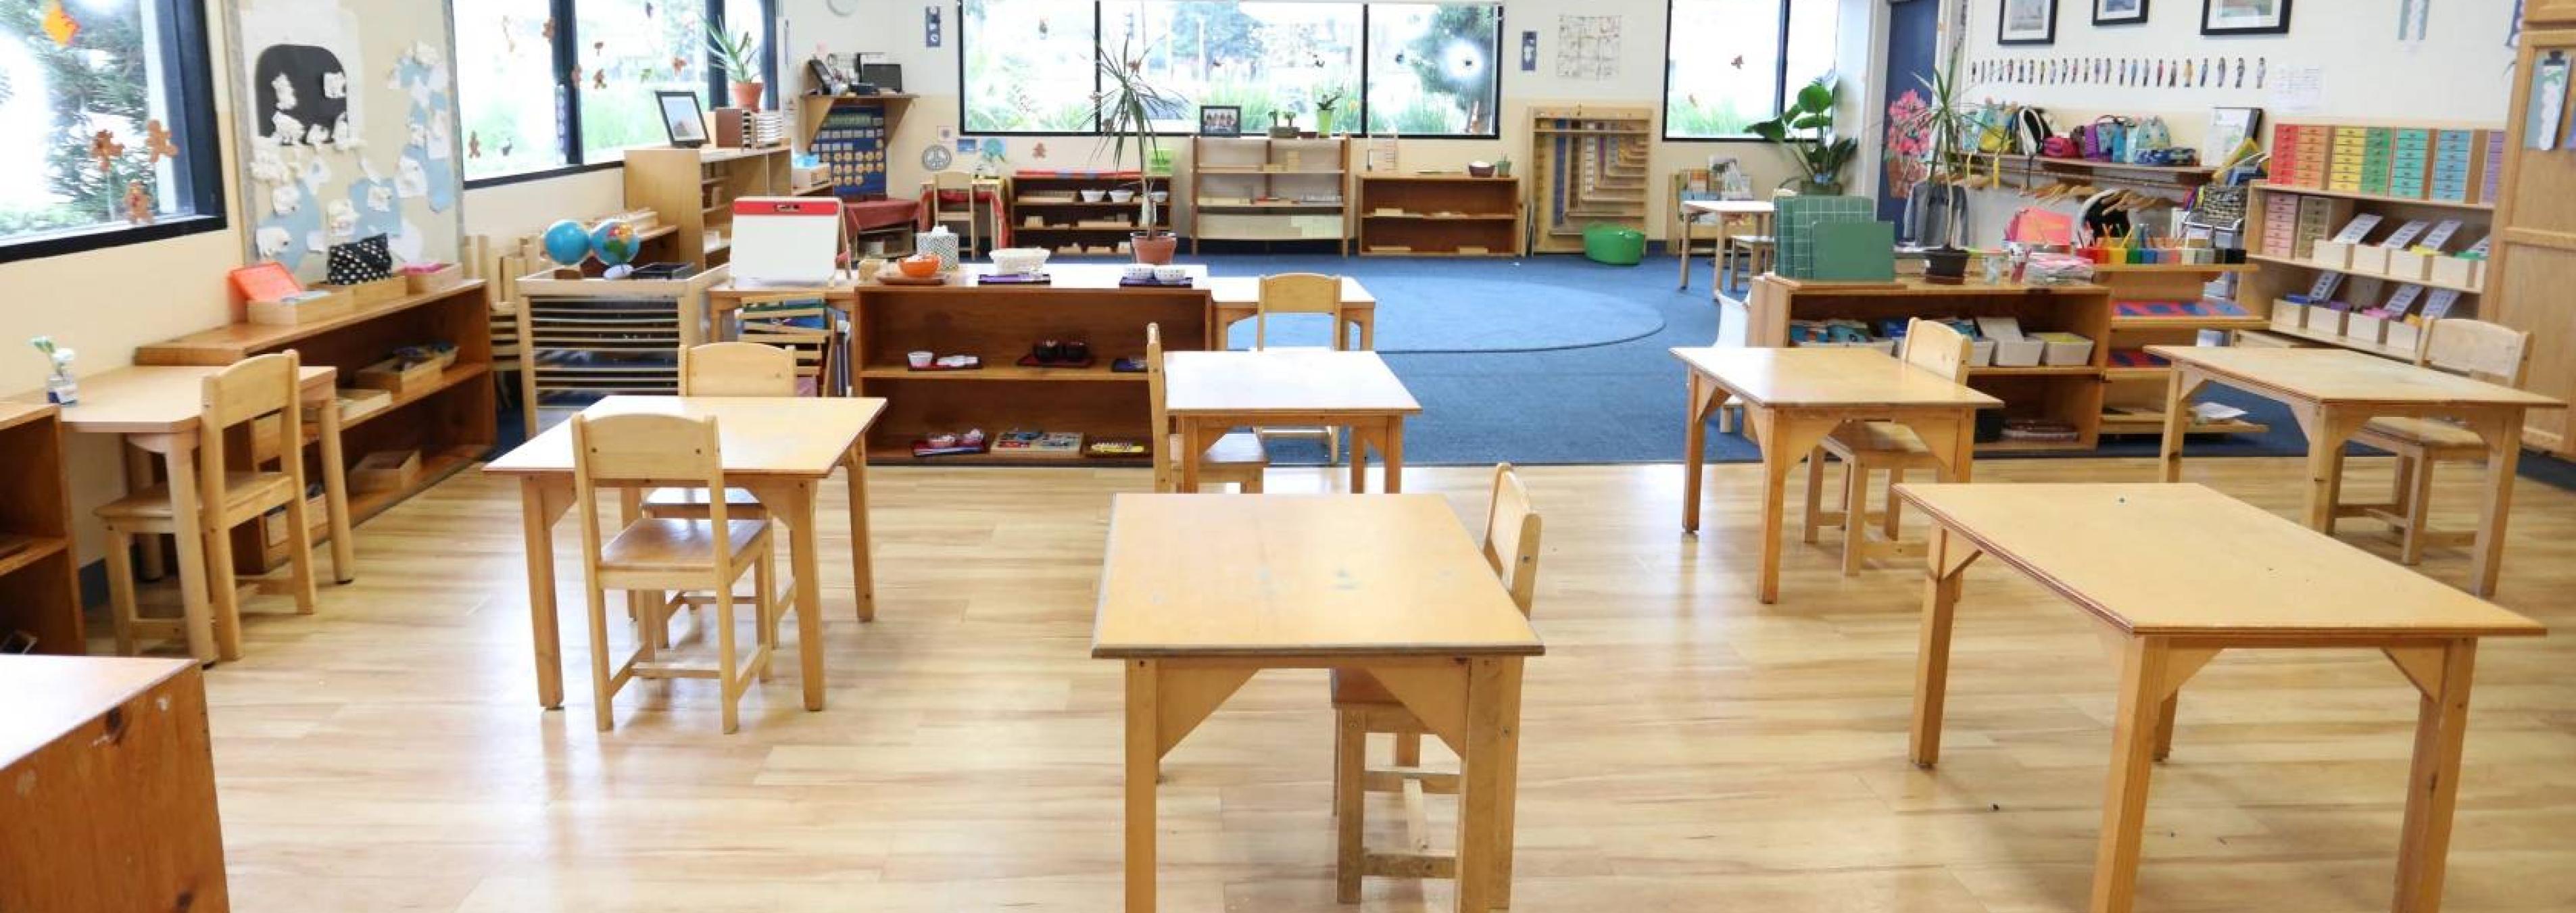 A Montessori classroom where one of our MAT students did their student teaching